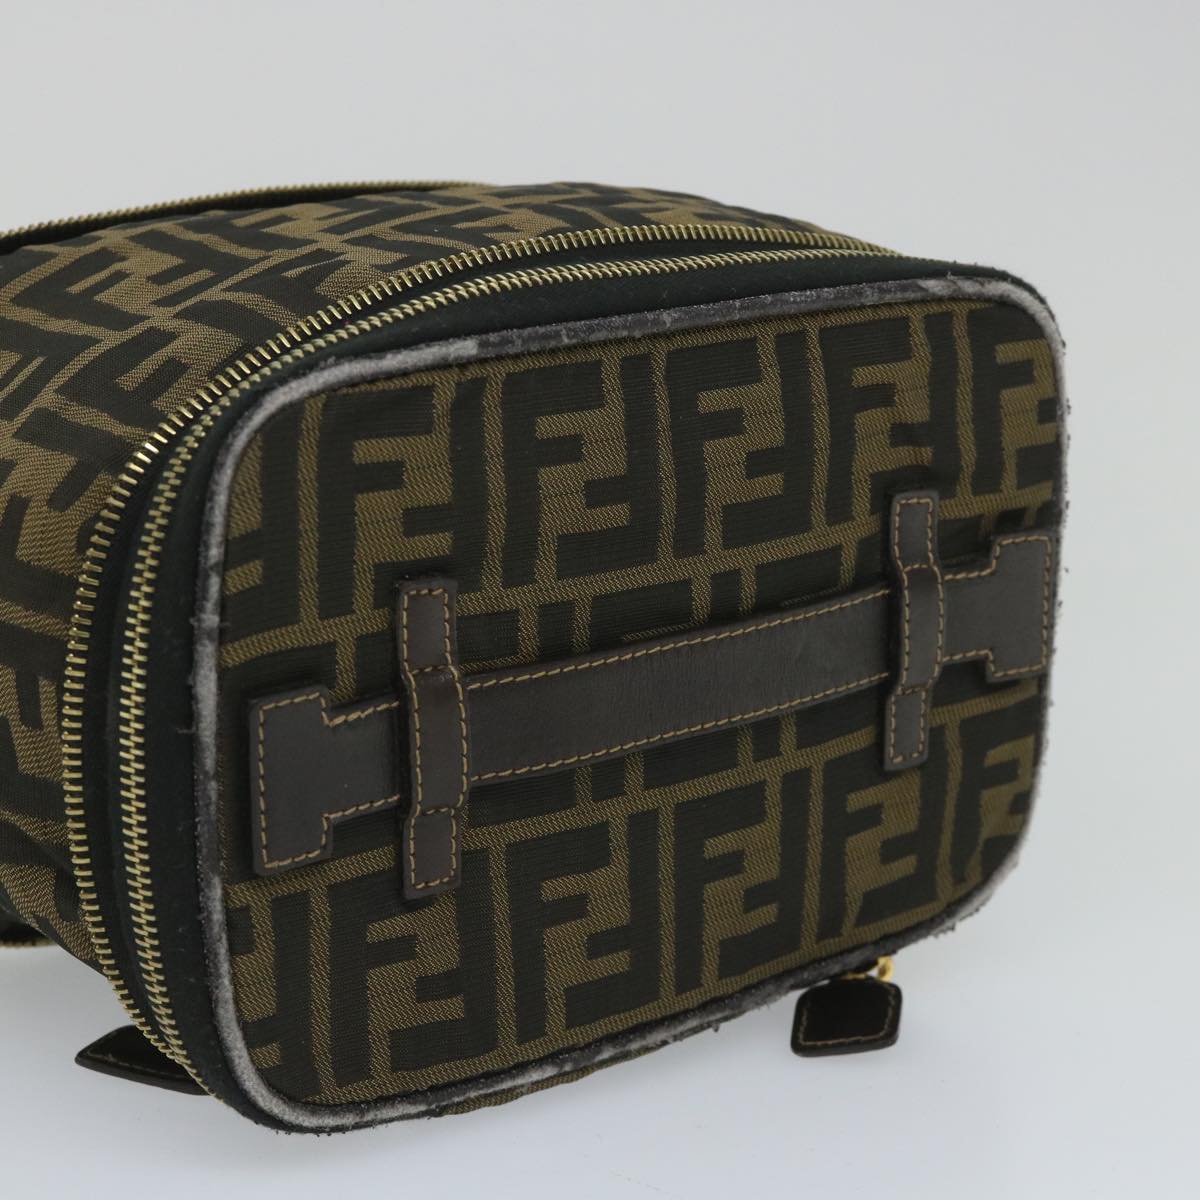 FENDI Zucca Canvas Vanity Cosmetic Pouch Black Brown Auth yb401